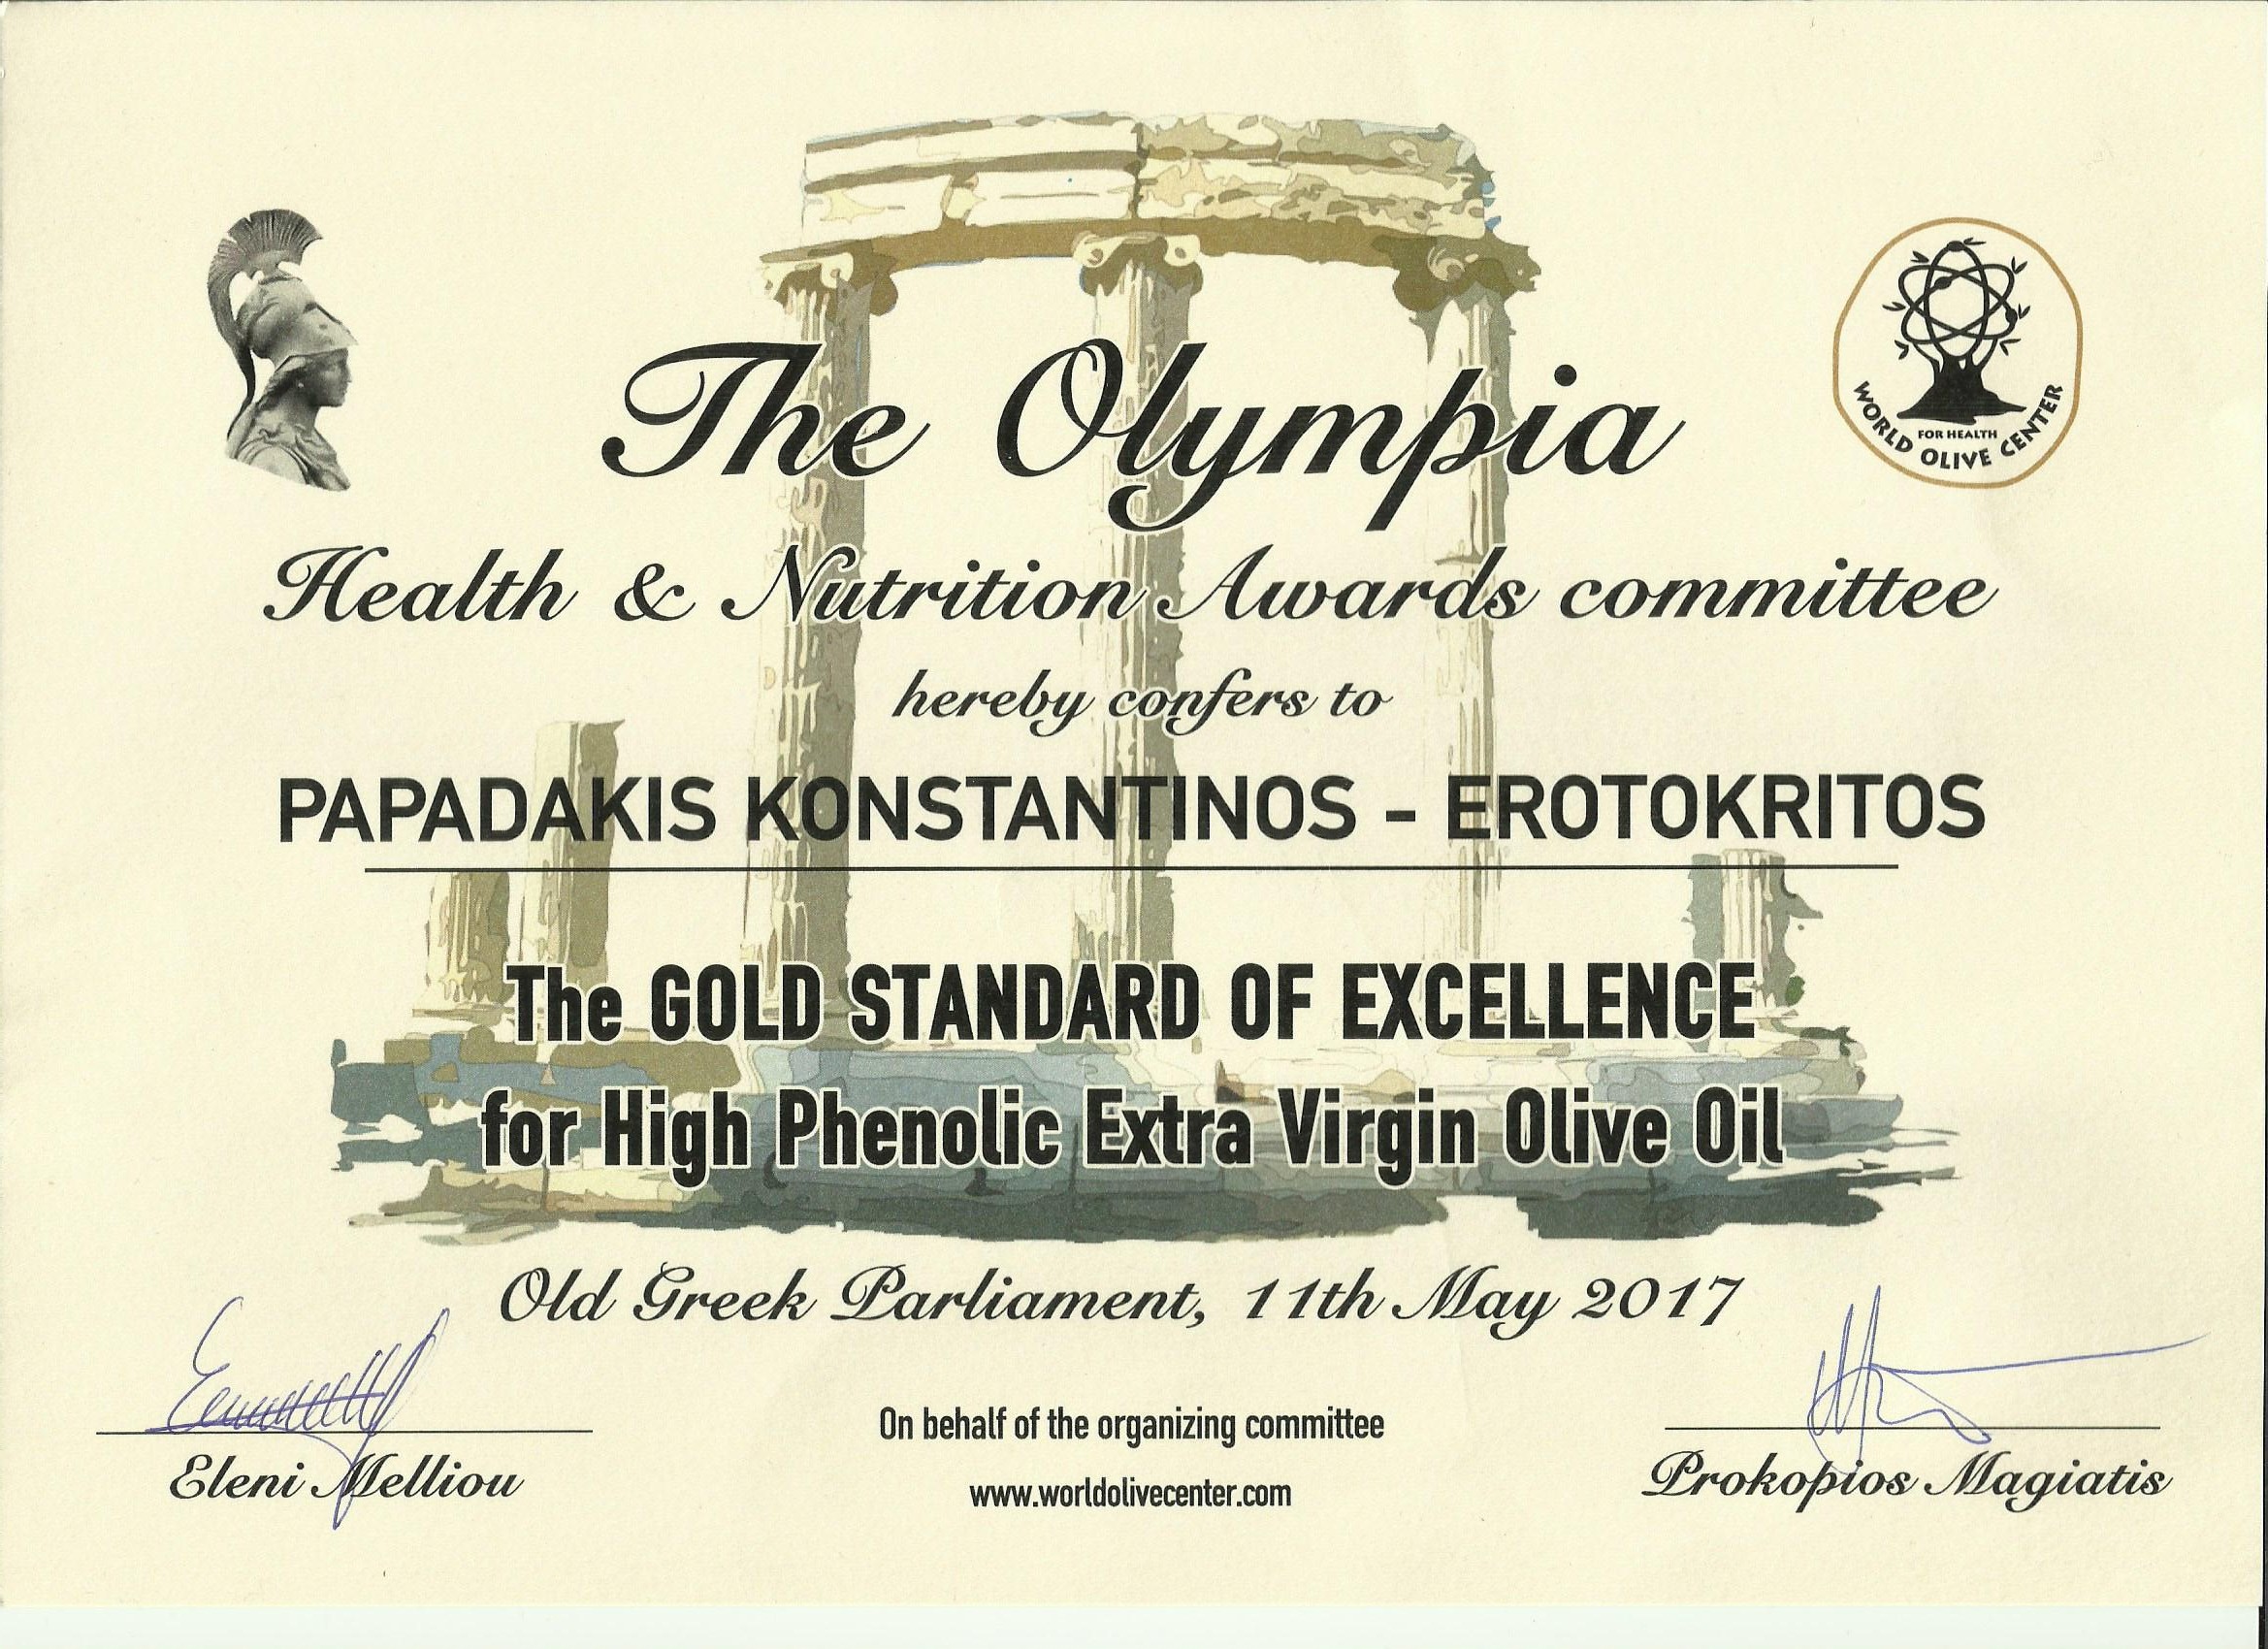 The GOLD STANDARD OF EXCELLENCE 2017